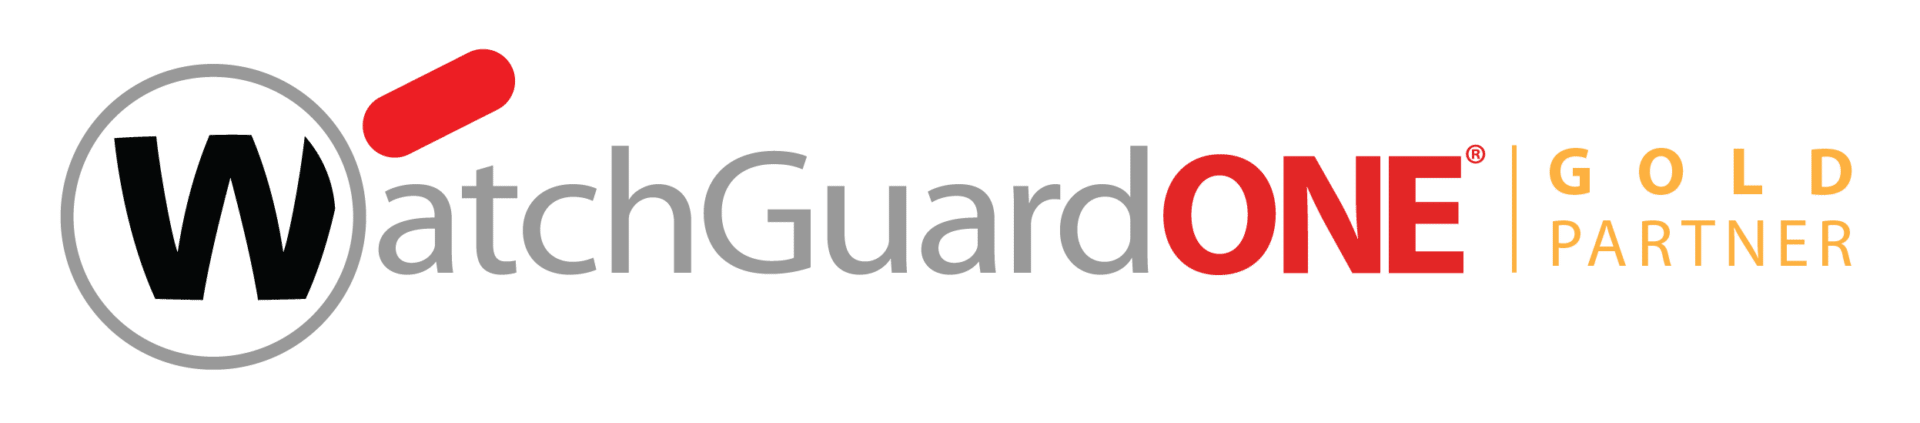 Watch Guard ONE Gold Partner